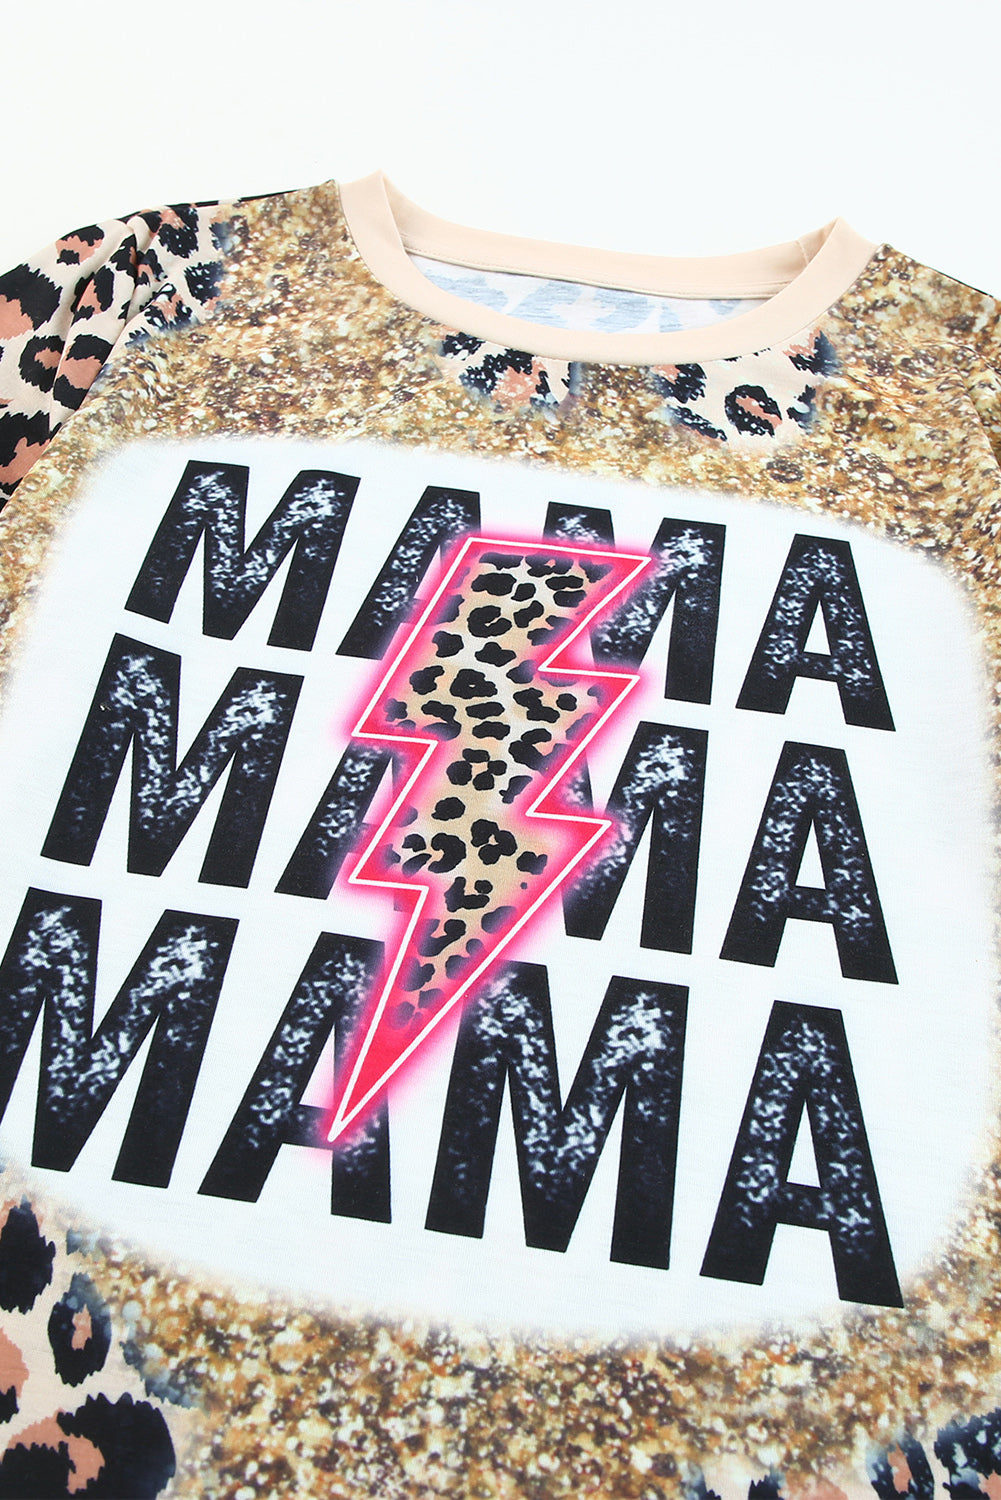 MAMA Lightning Graphic Leopard Dyed T Shirt